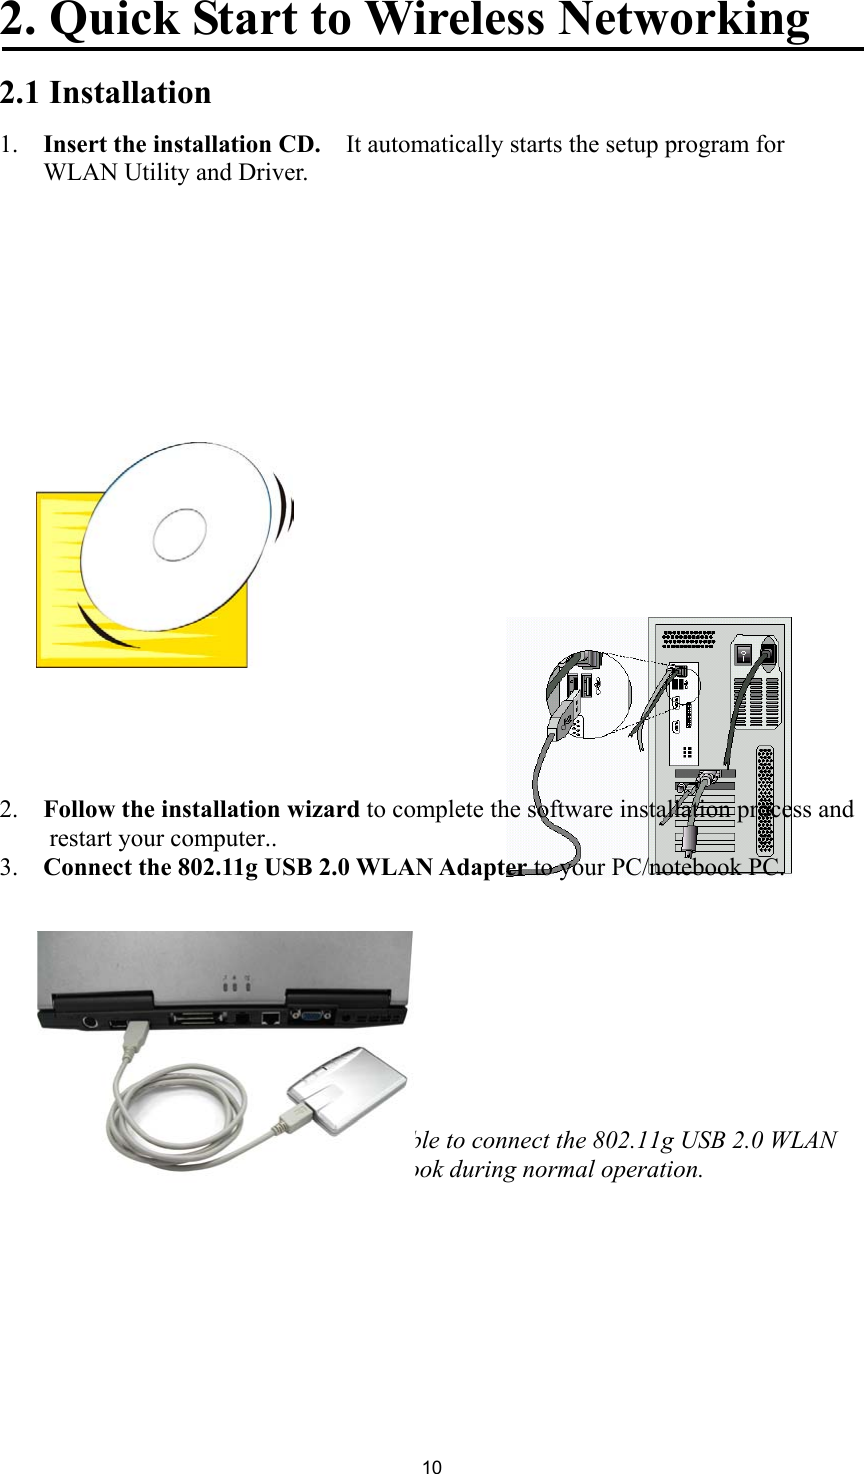 102. Quick Start to Wireless Networking2.1 Installation1.  Insert the installation CD.    It automatically starts the setup program forWLAN Utility and Driver.2.  Follow the installation wizard to complete the software installation process andrestart your computer..3.  Connect the 802.11g USB 2.0 WLAN Adapter to your PC/notebook PC.Note! Please use USB extension cable to connect the 802.11g USB 2.0 WLANAdapter with your PC/Notebook during normal operation.